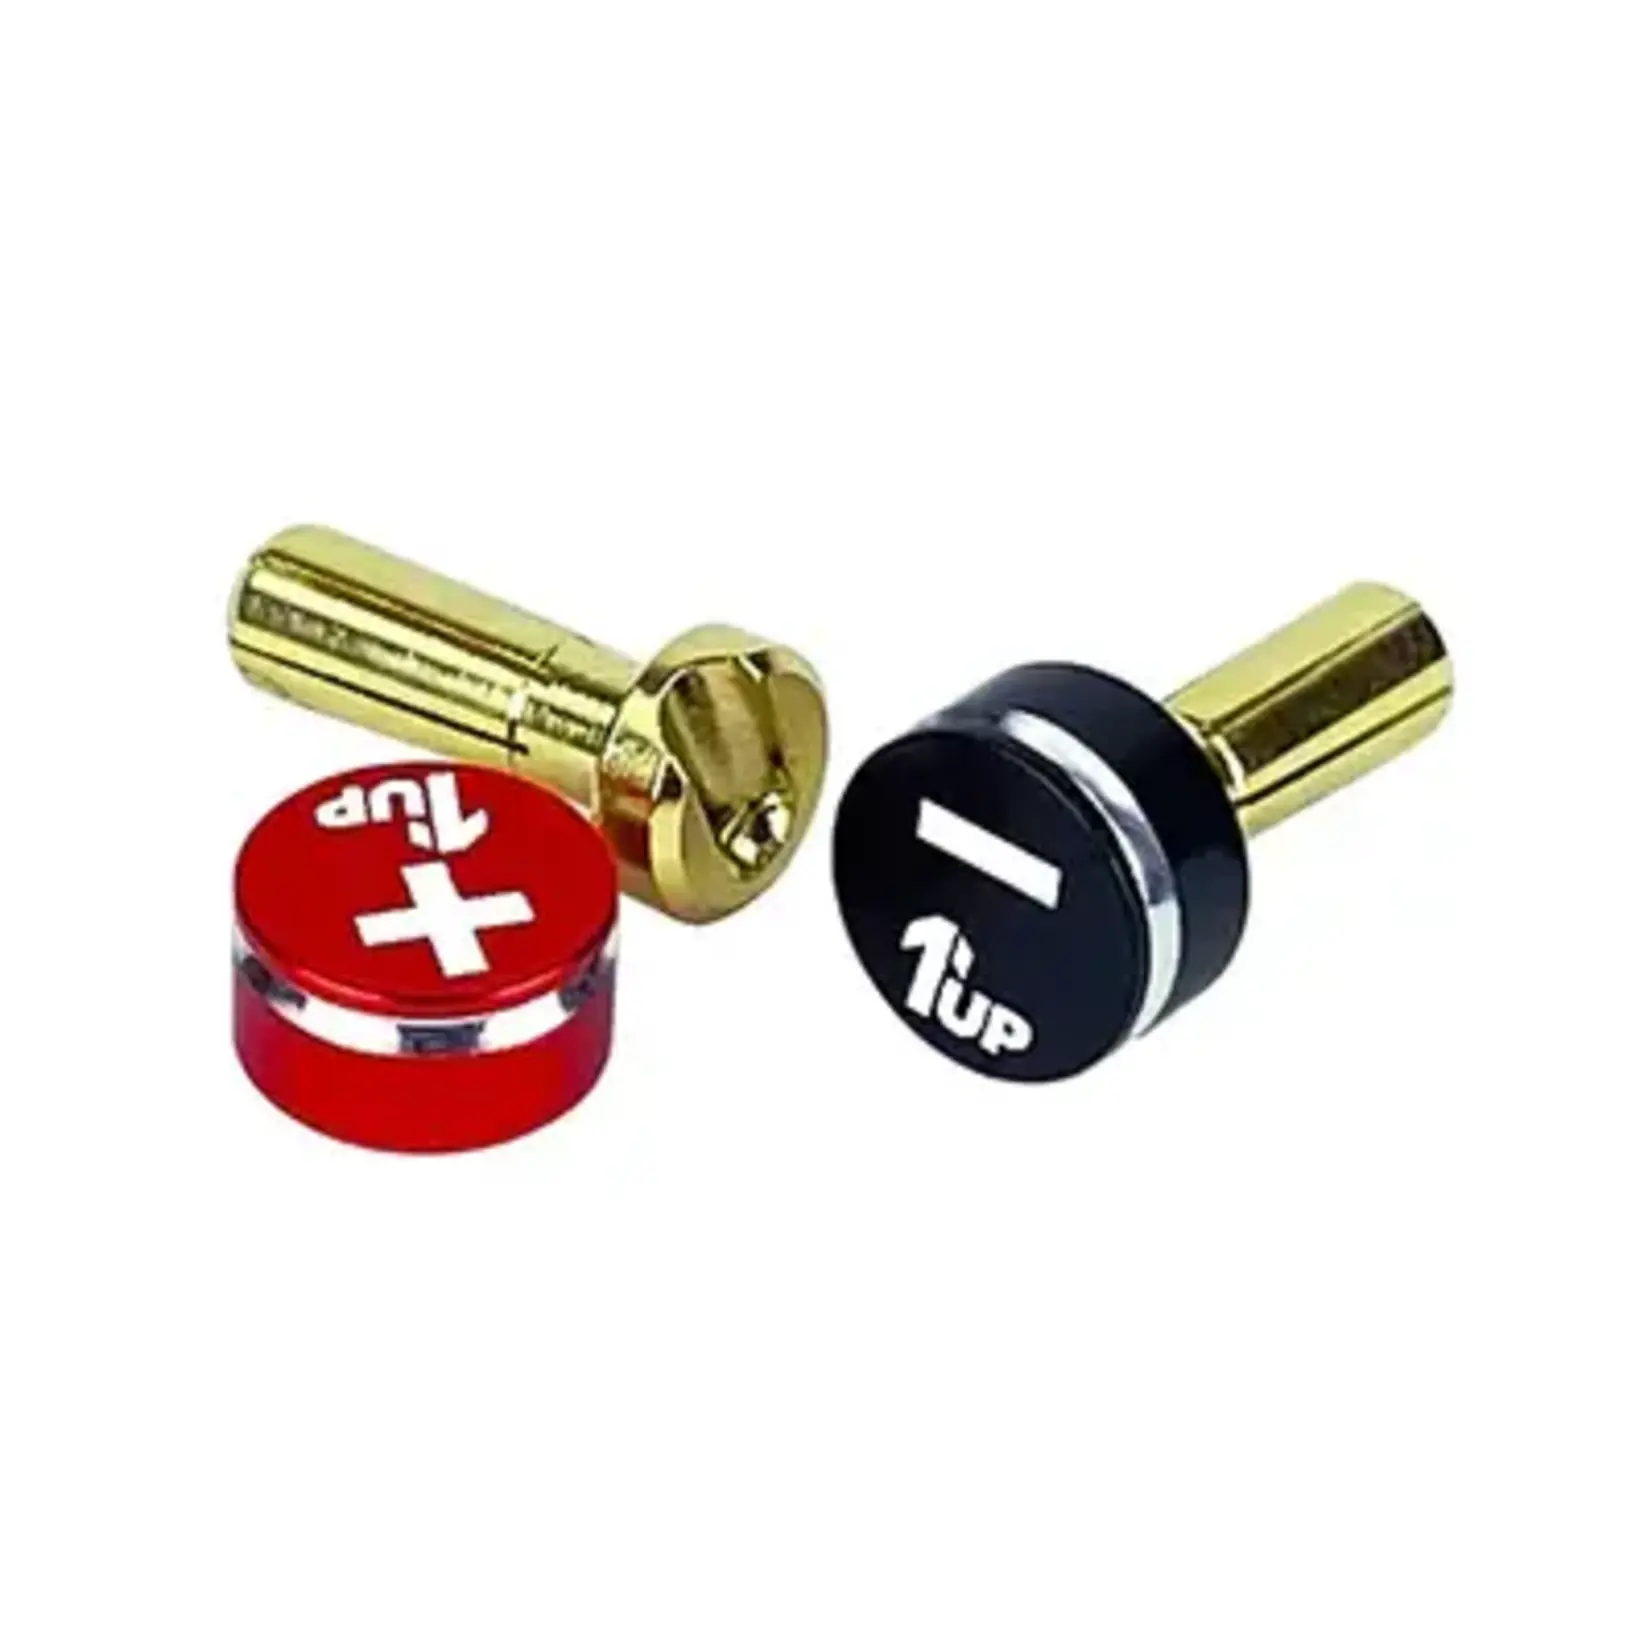 1UP 1UP190431 1Up Racing LowPro Bullet Plugs & Grips - 4mm - Black/Red